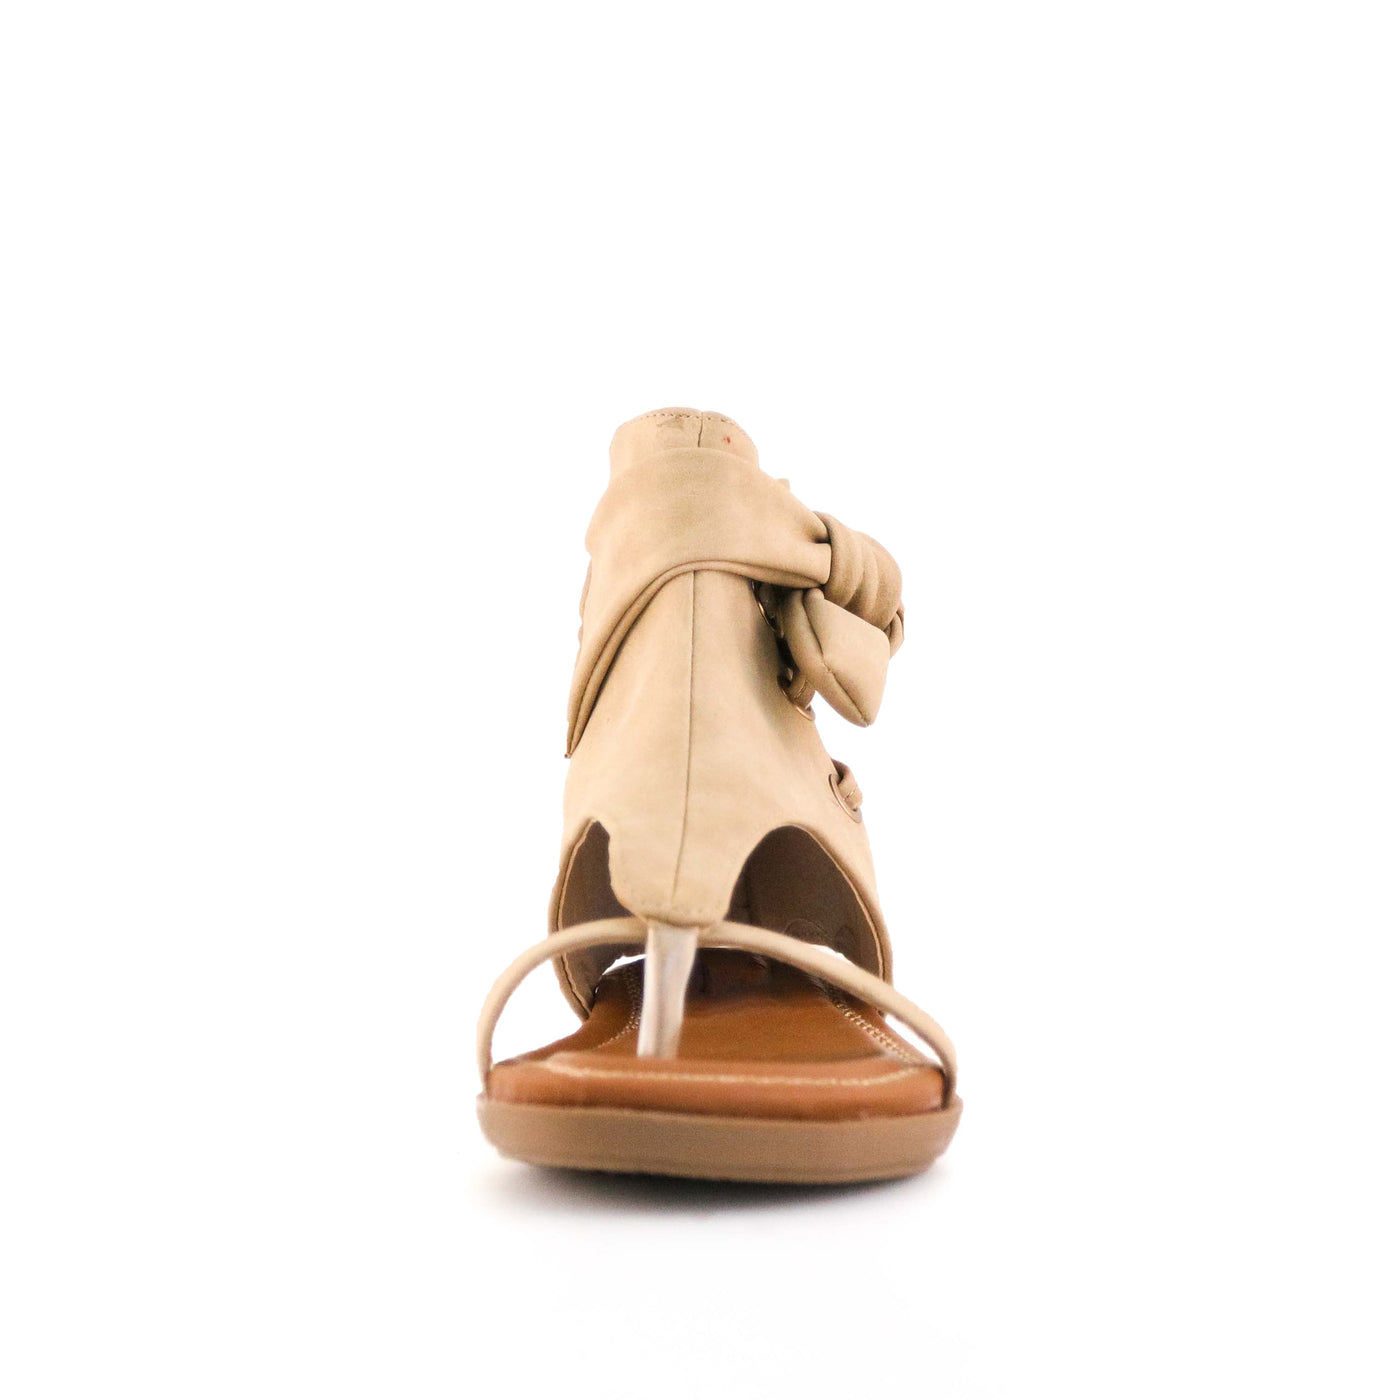 Women's Chi Lace Detail Gladiator Sandal Natural by Nest Shoes